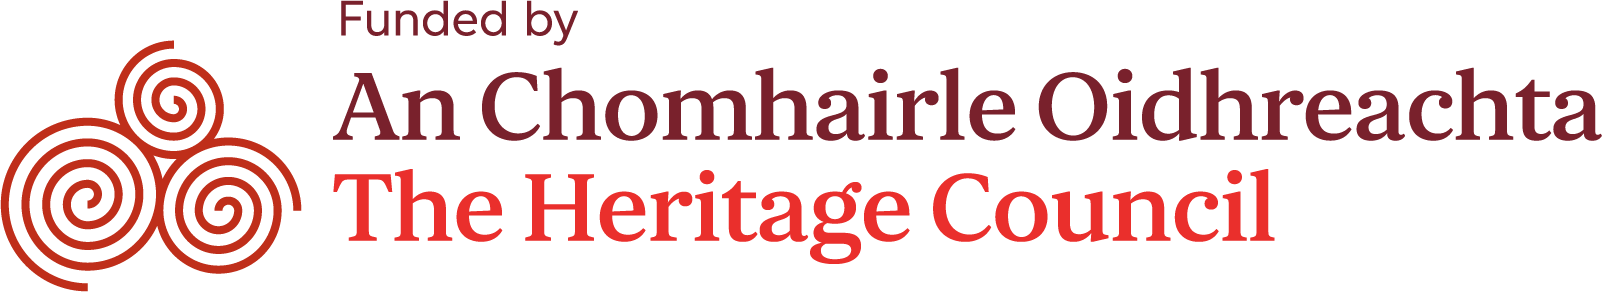 The Heritage Council